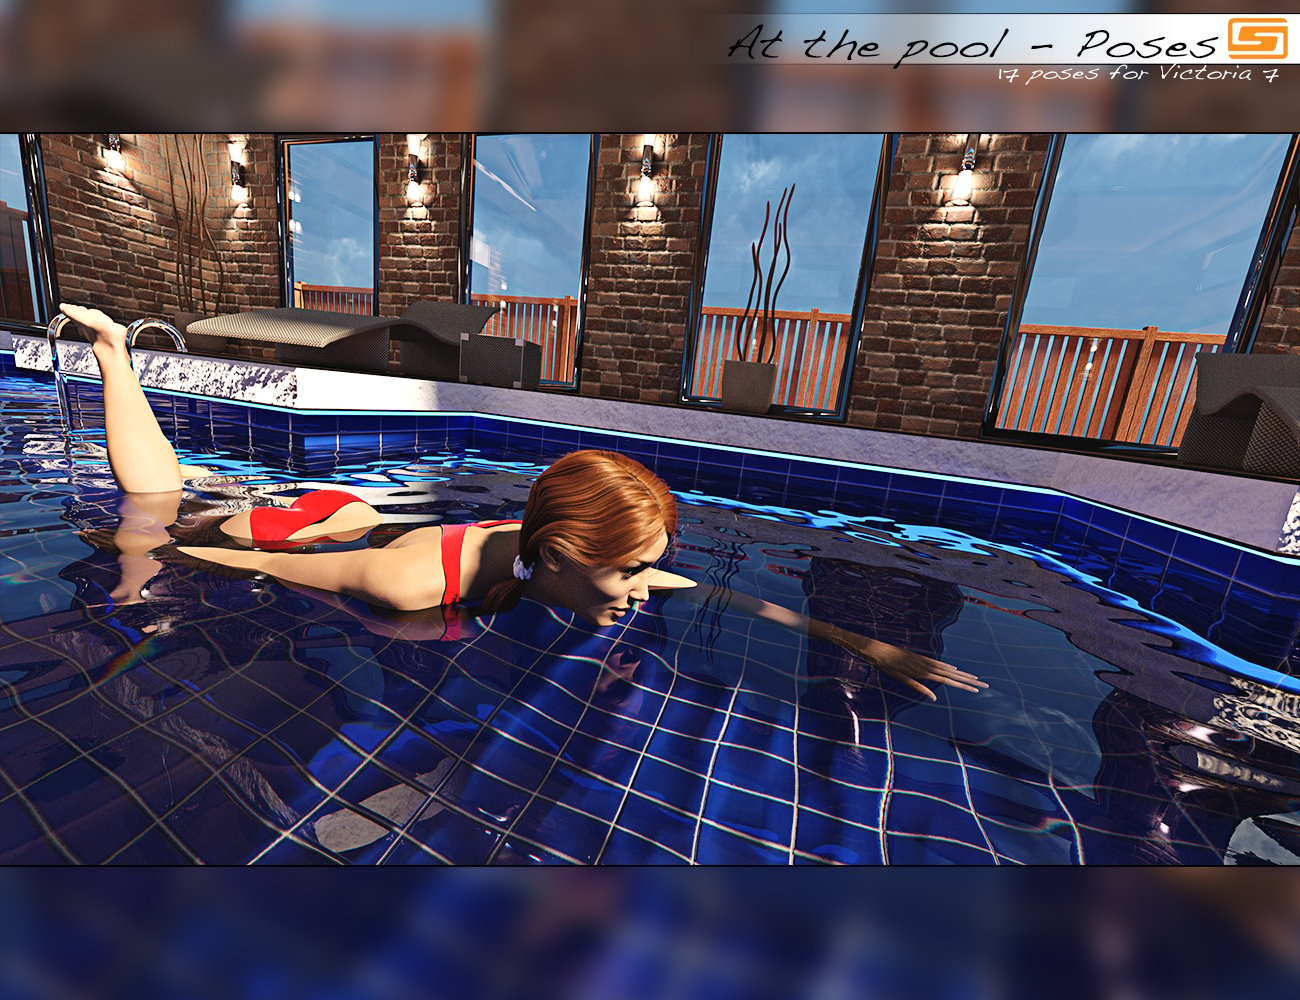 At the Pool - Poses for Victoria 7 by: Sedor, 3D Models by Daz 3D